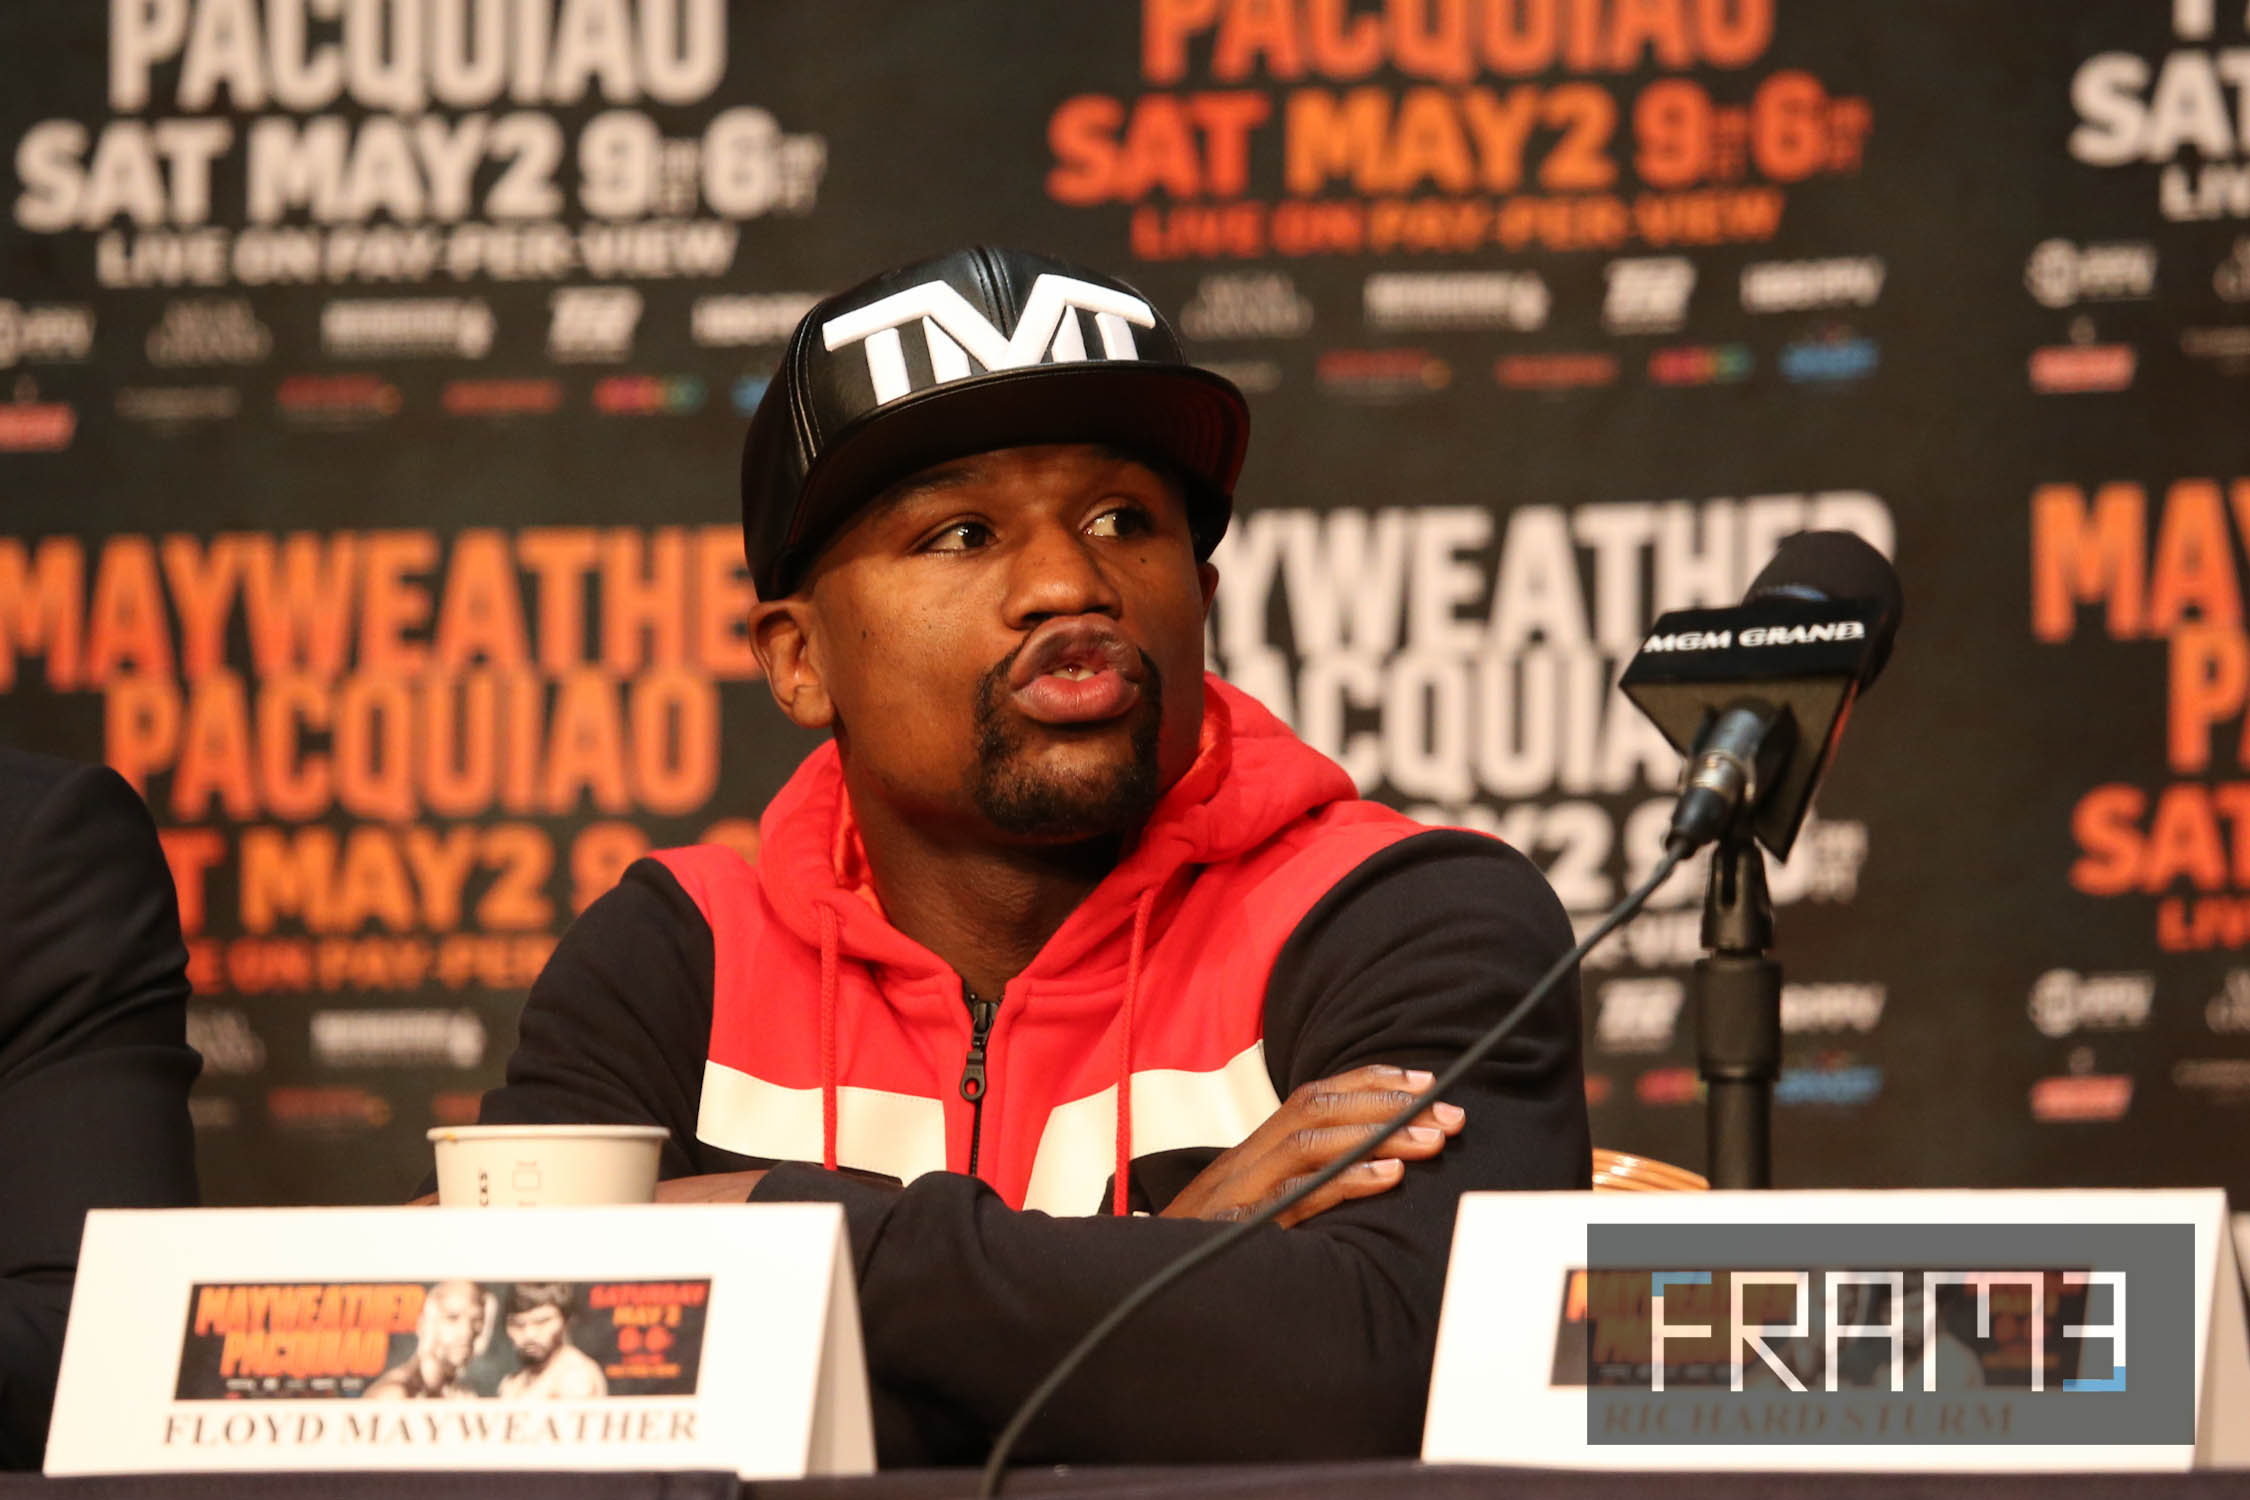 FLoyd Mayweather Jr. during the final press conference held at the KA Theatre in MGM Grand, Las Vegas Nevada on Wednesday, 29 April 2015. PHOTO BY REM ZAMORA